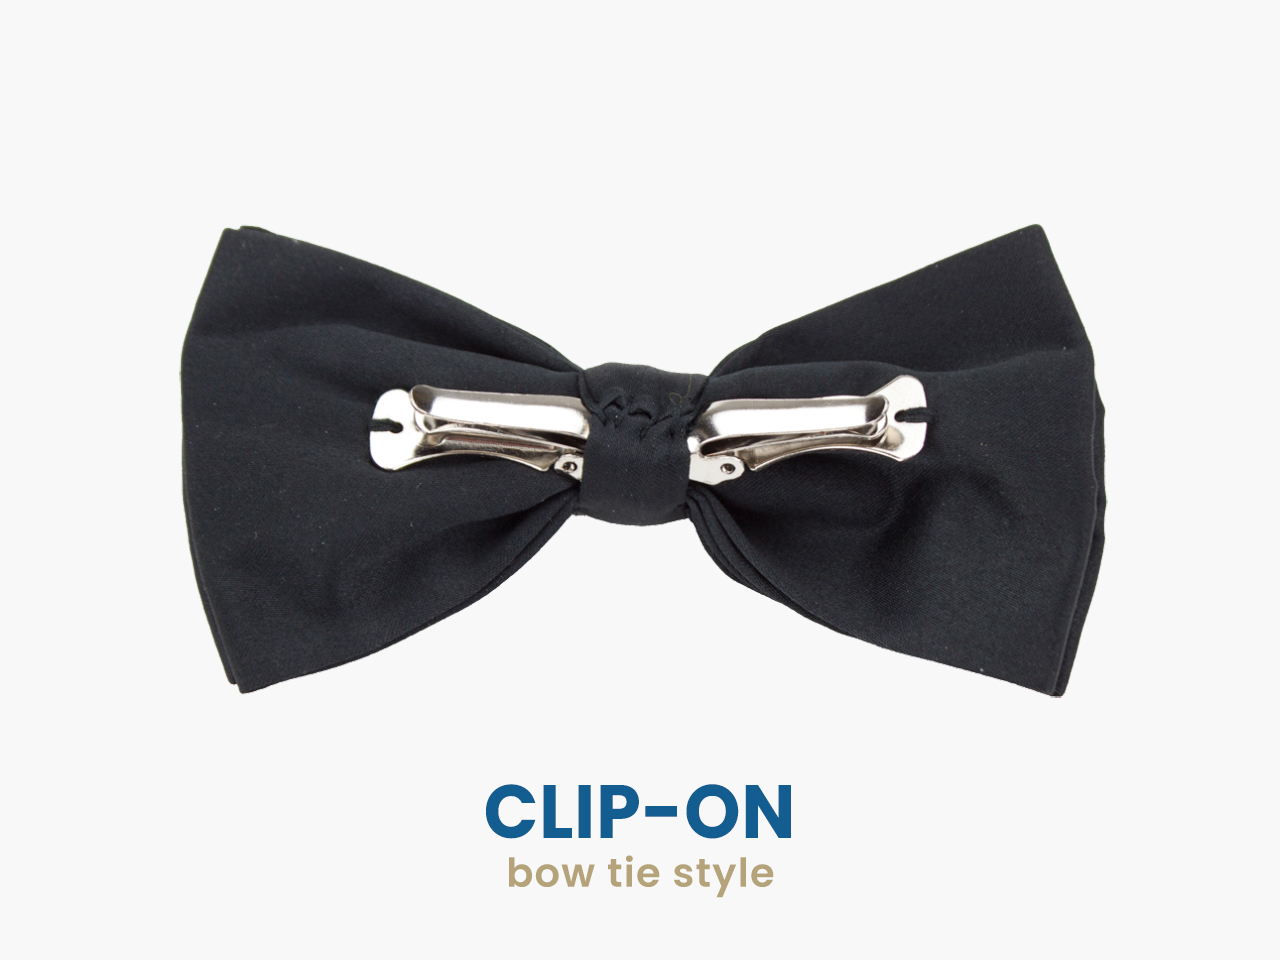 the clip-on bow tie